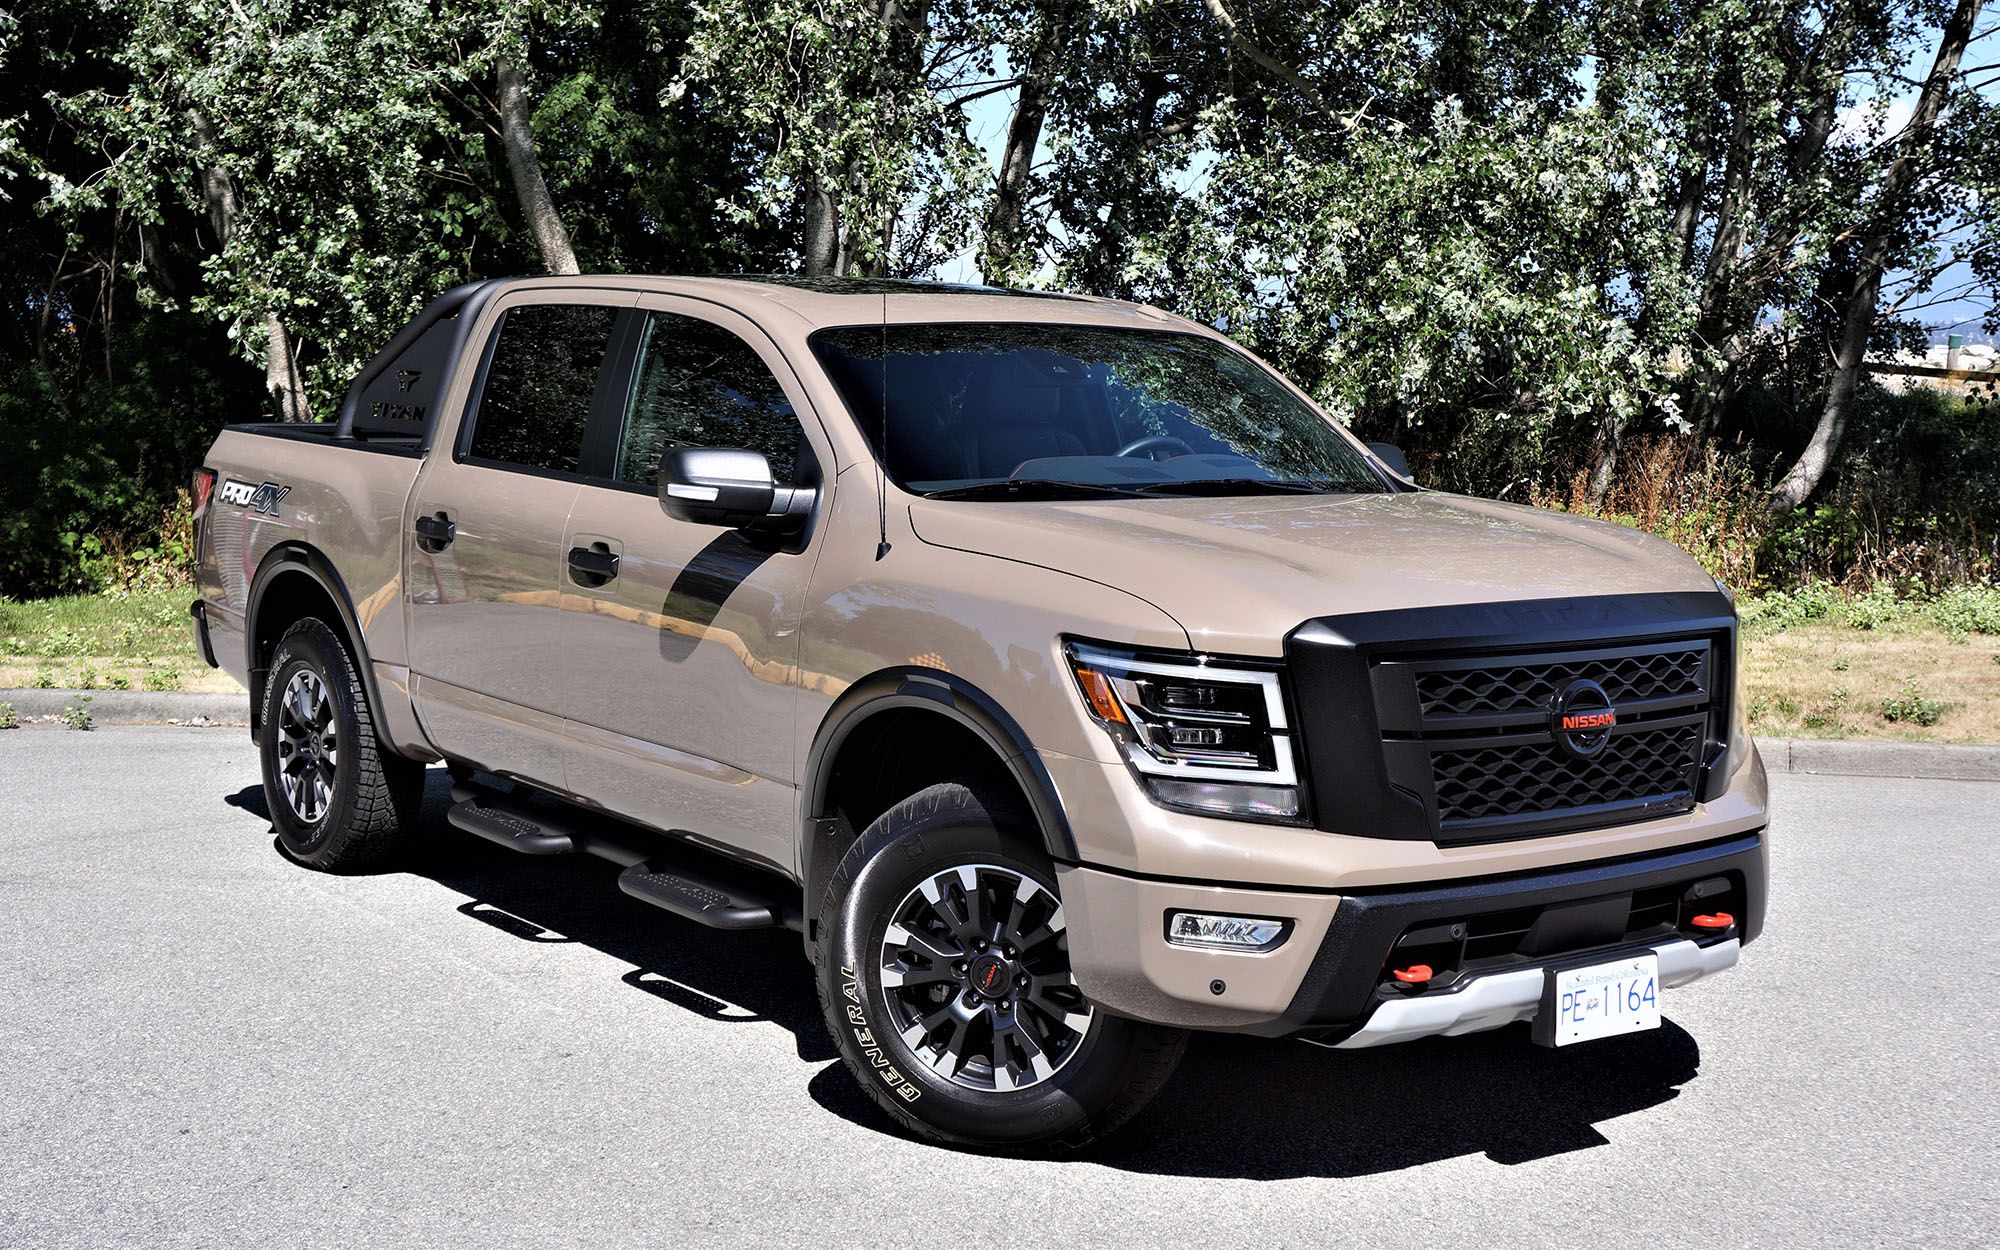 The 2021 Nissan Titan Crew Cab PRO-4X Luxury is one great looking pickup truck, especially in sporty PRO-4X trim.